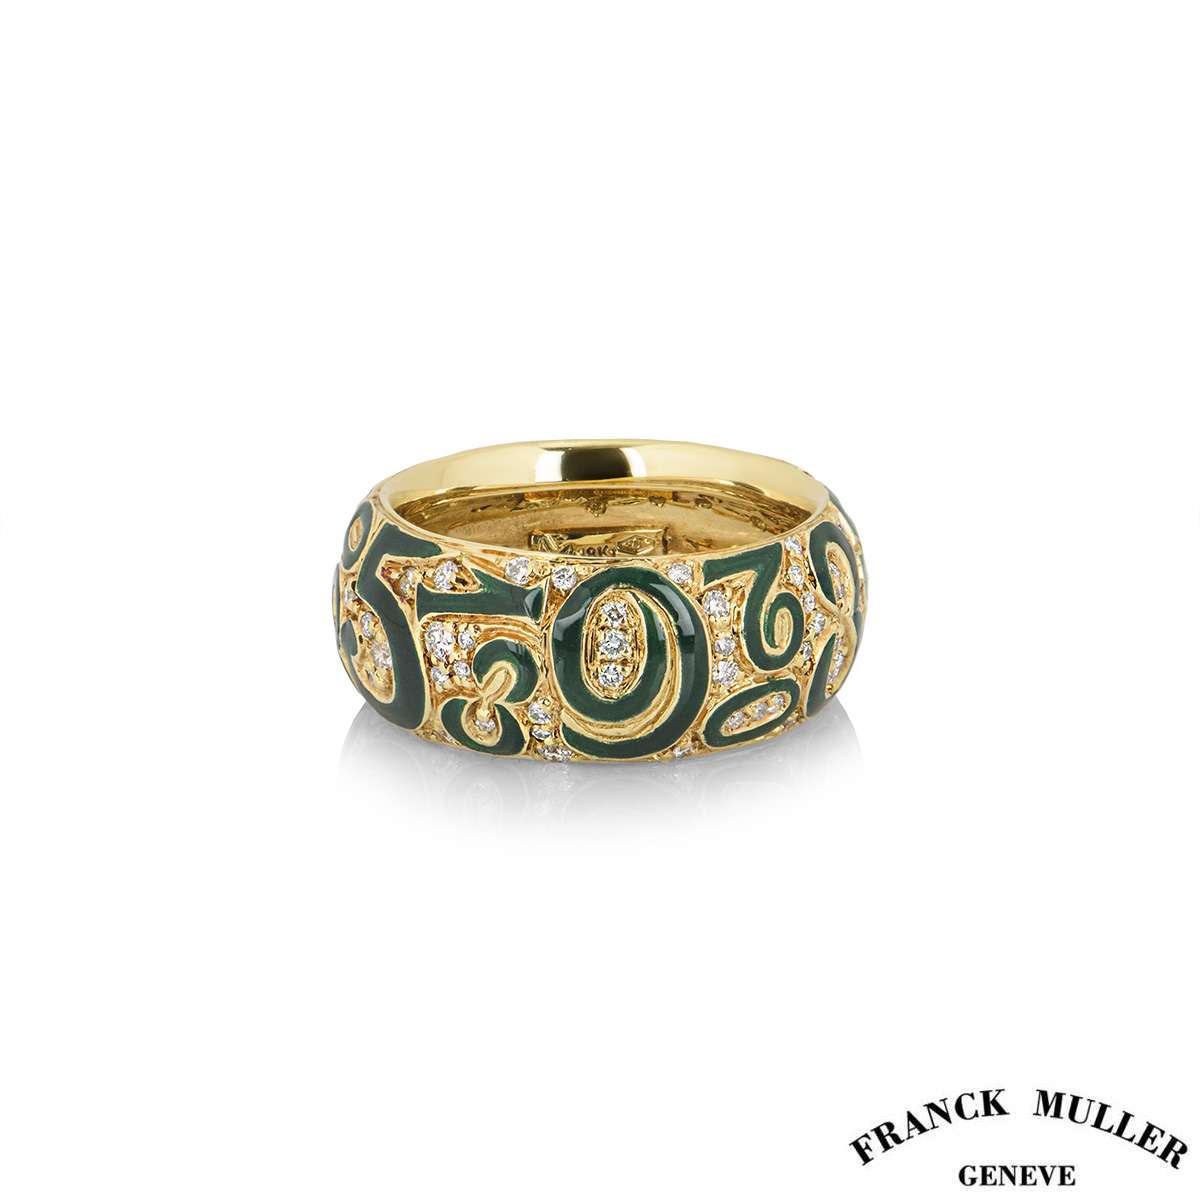 Franck Muller Yellow Gold Crazy Hours Diamond and Enamel Ring